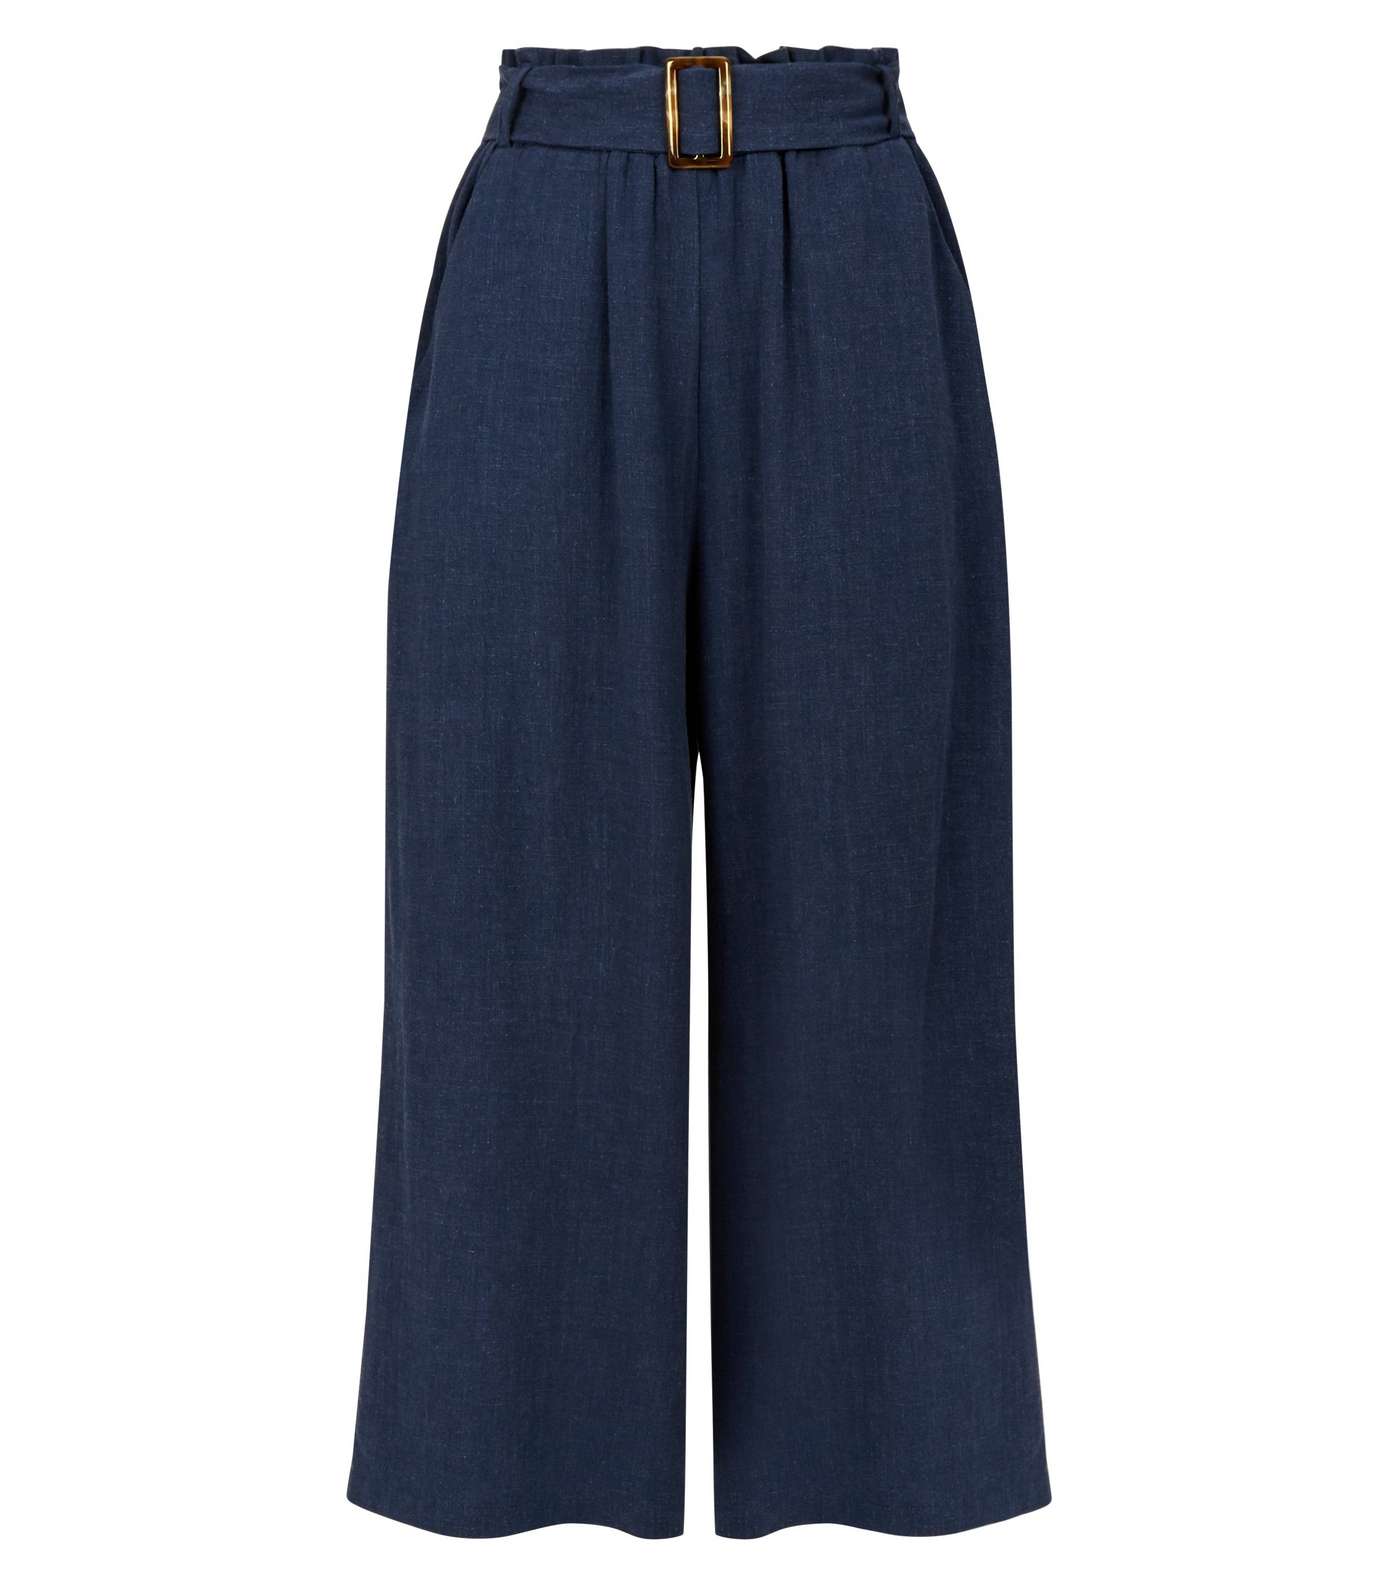 Navy Linen-Look Belted Culottes  Image 4